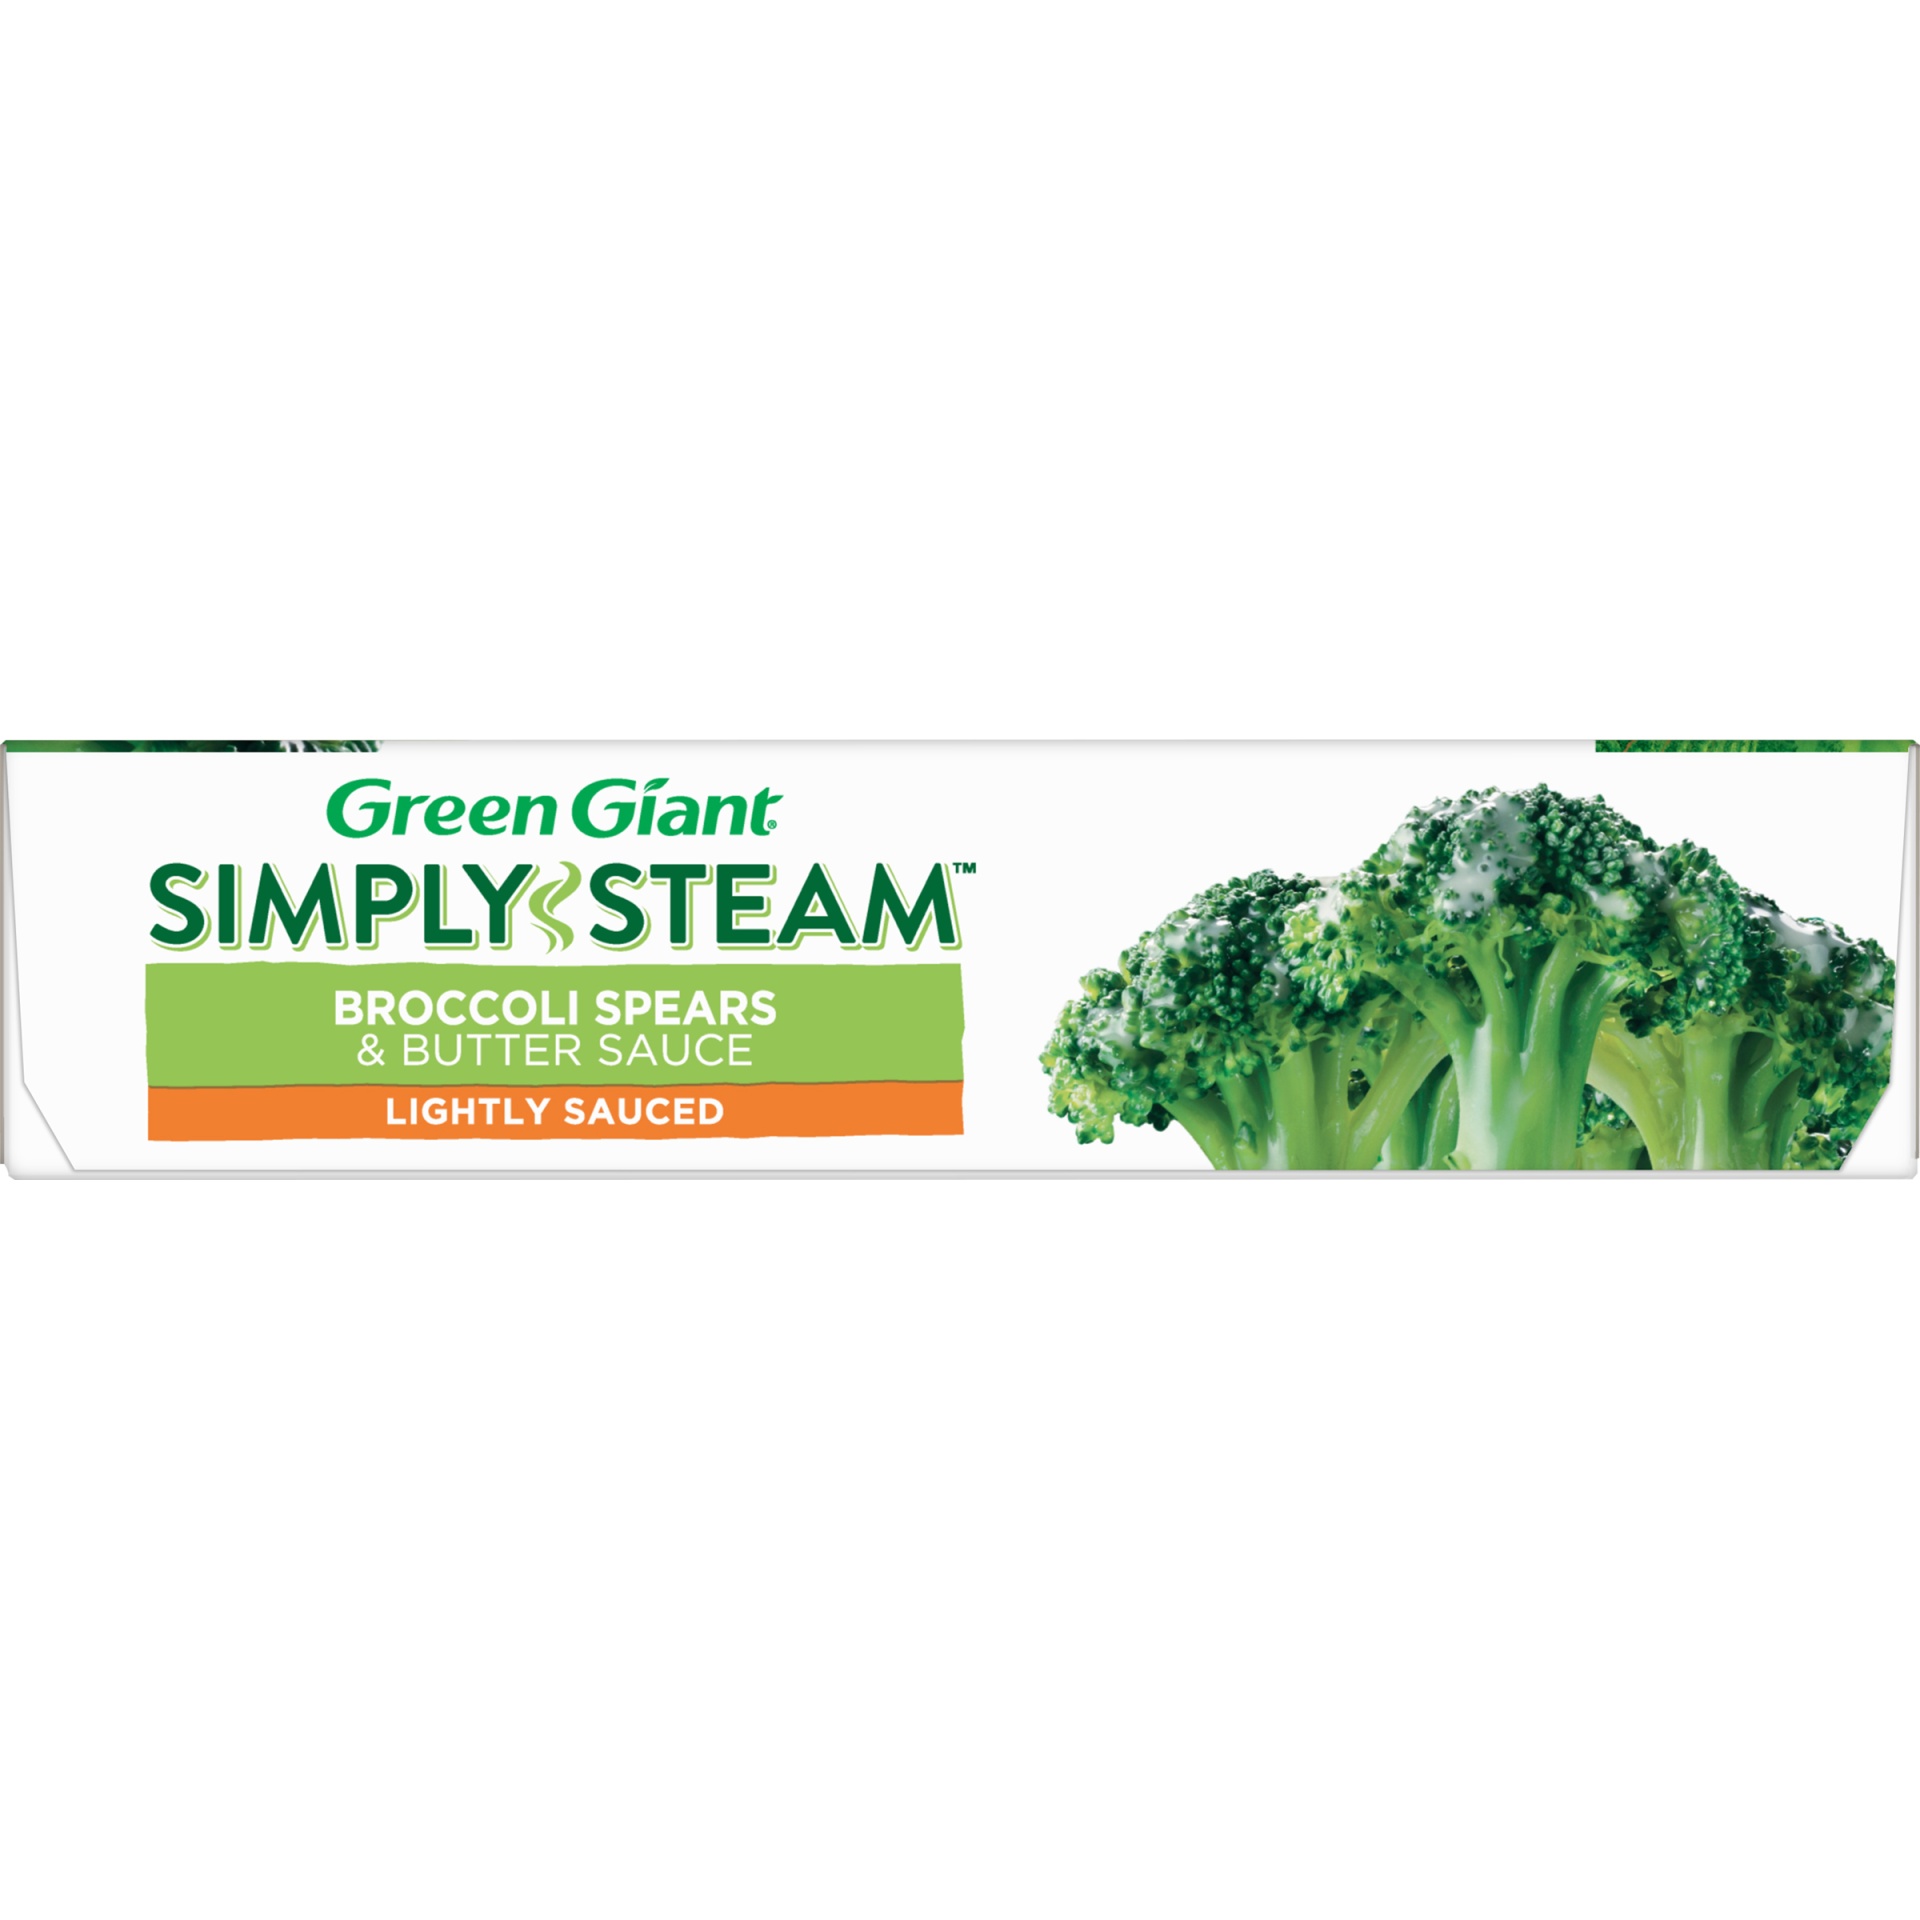 slide 5 of 8, Green Giant Simply Steam Lightly Sauced Broccoli Spears & Butter Sauce 10 oz, 10 oz